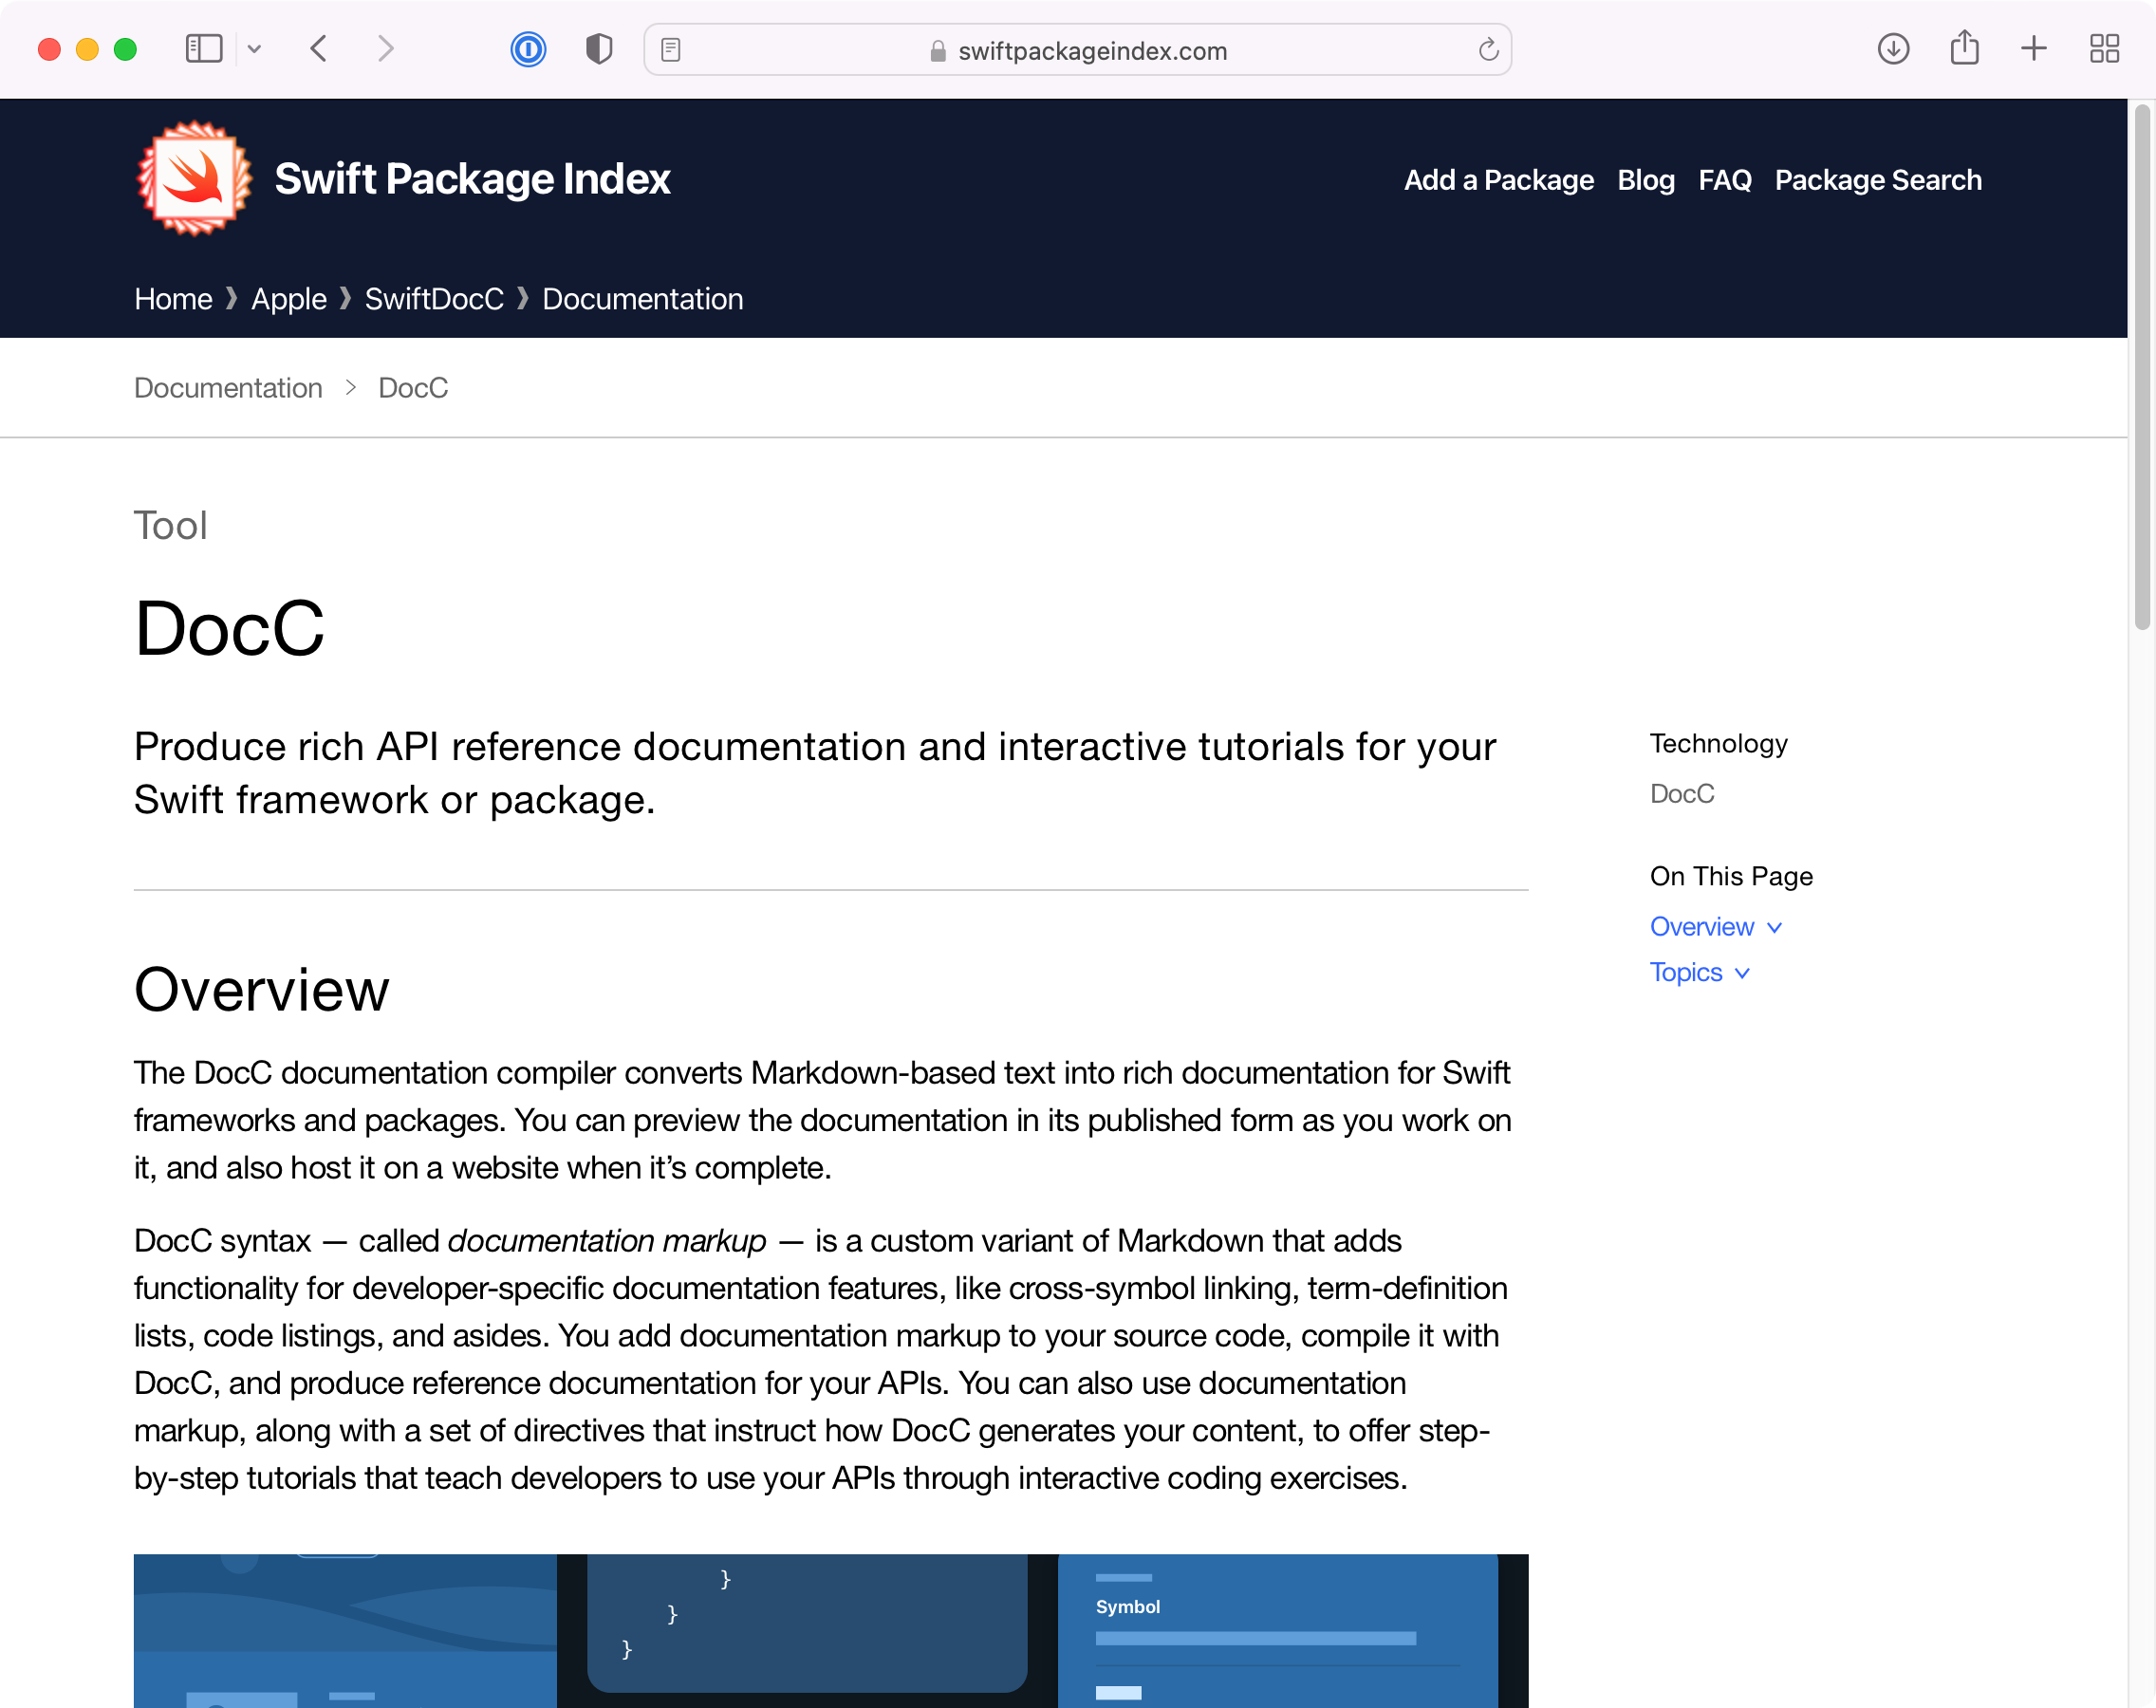 Hosted documentation for the DocC package shown in the context of the Swift Package Index with a header above the documentation.